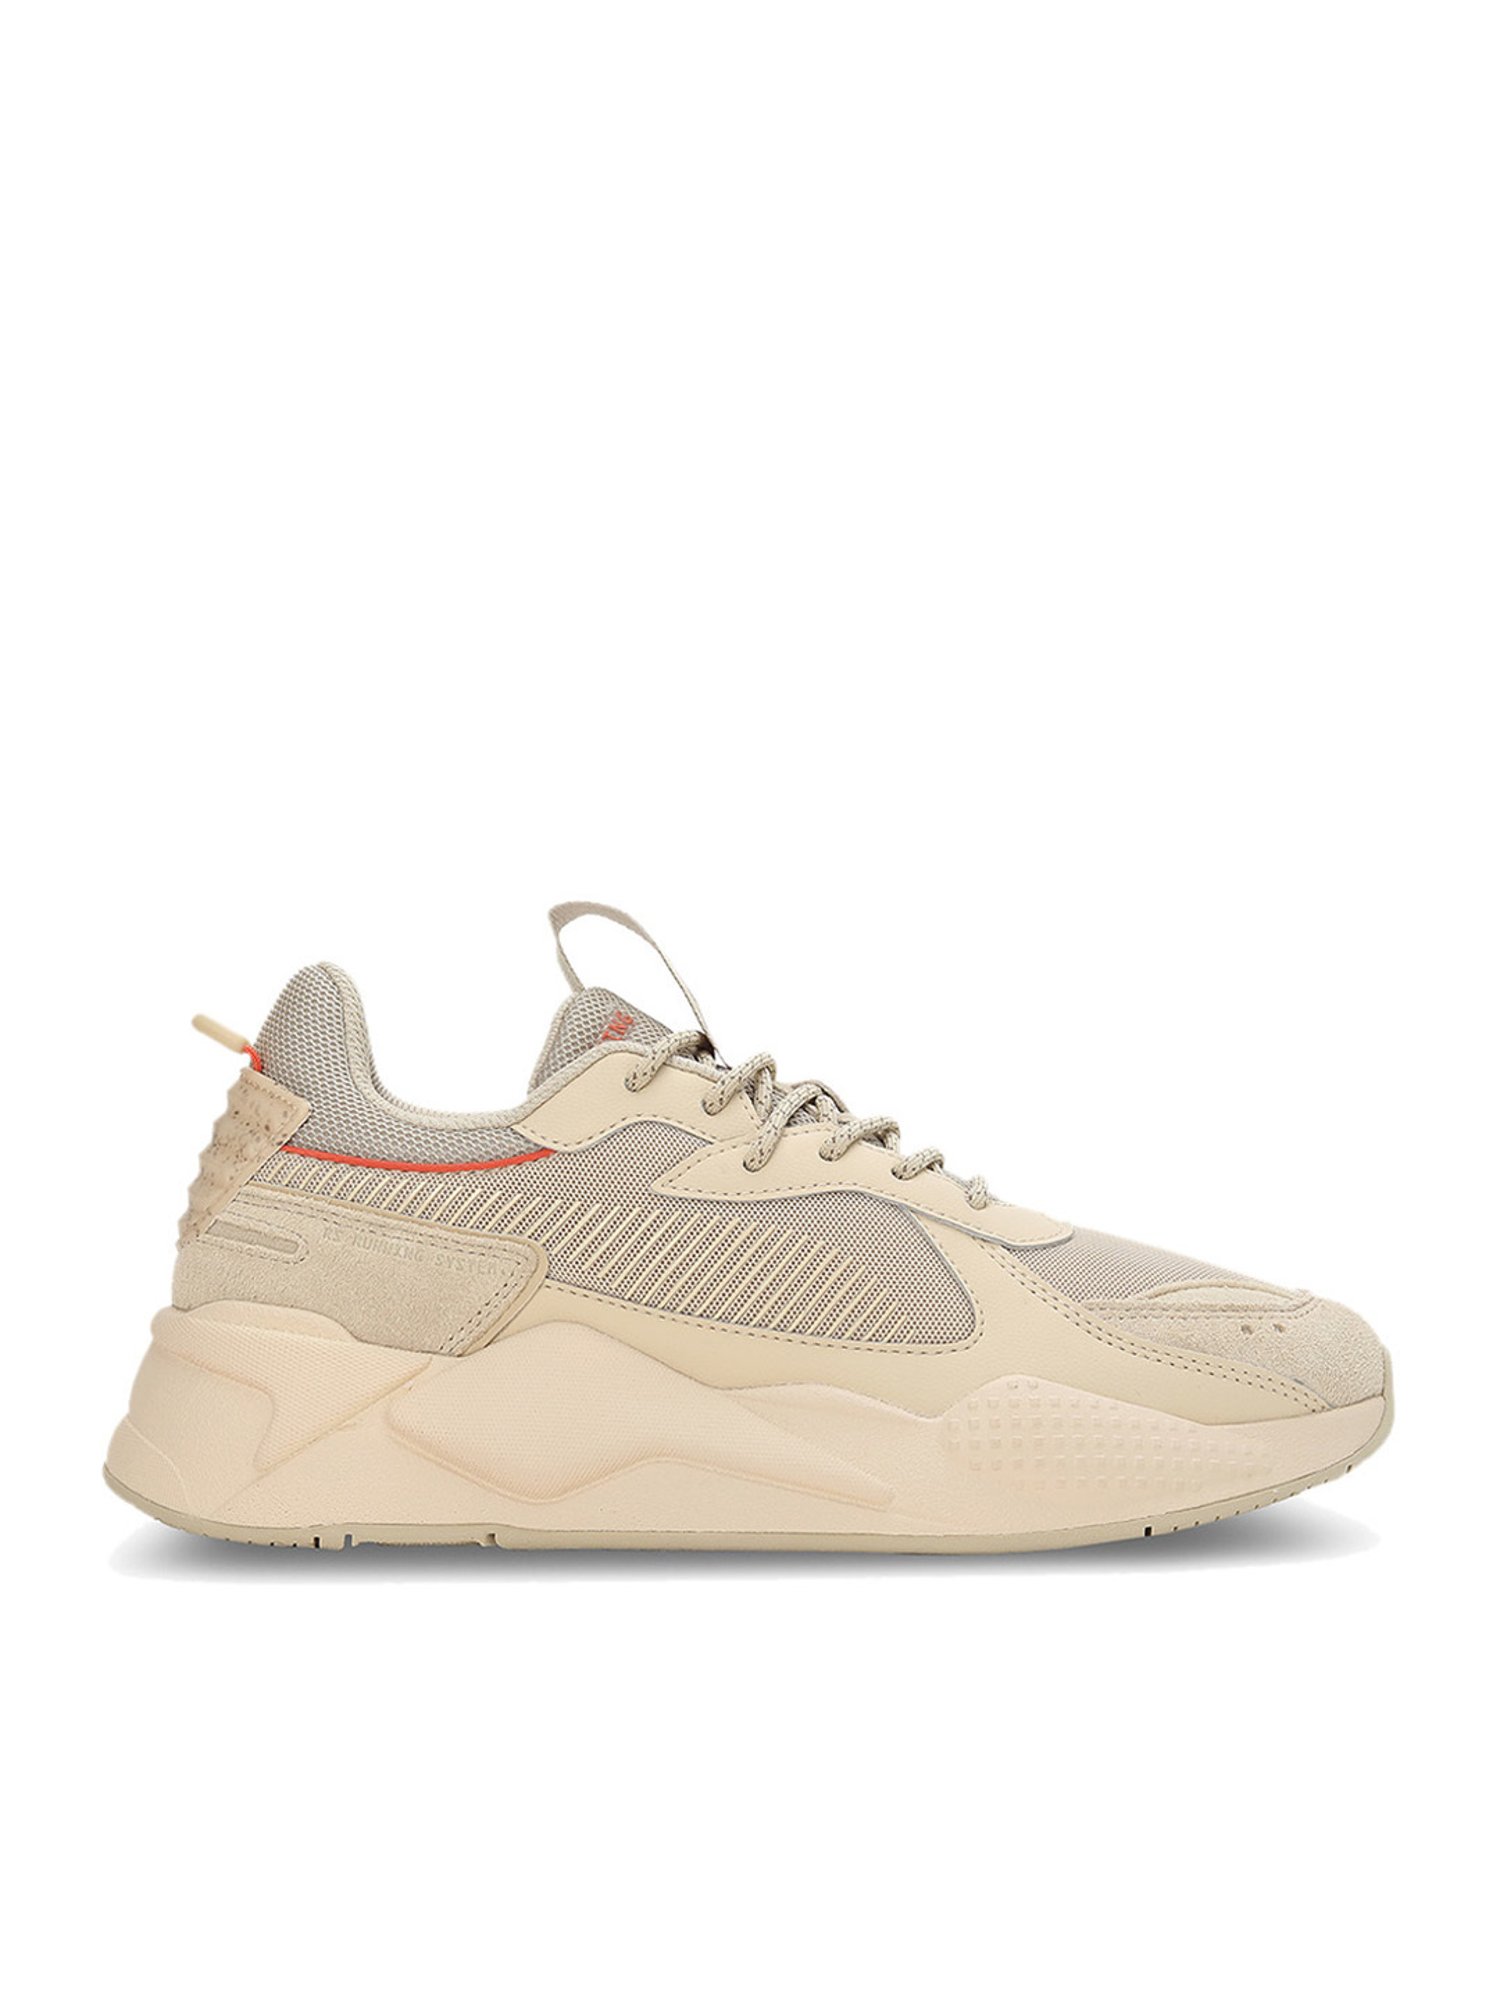 Buy Men's RS-X Elevated Beige Running Shoes for at Best Price @ Tata